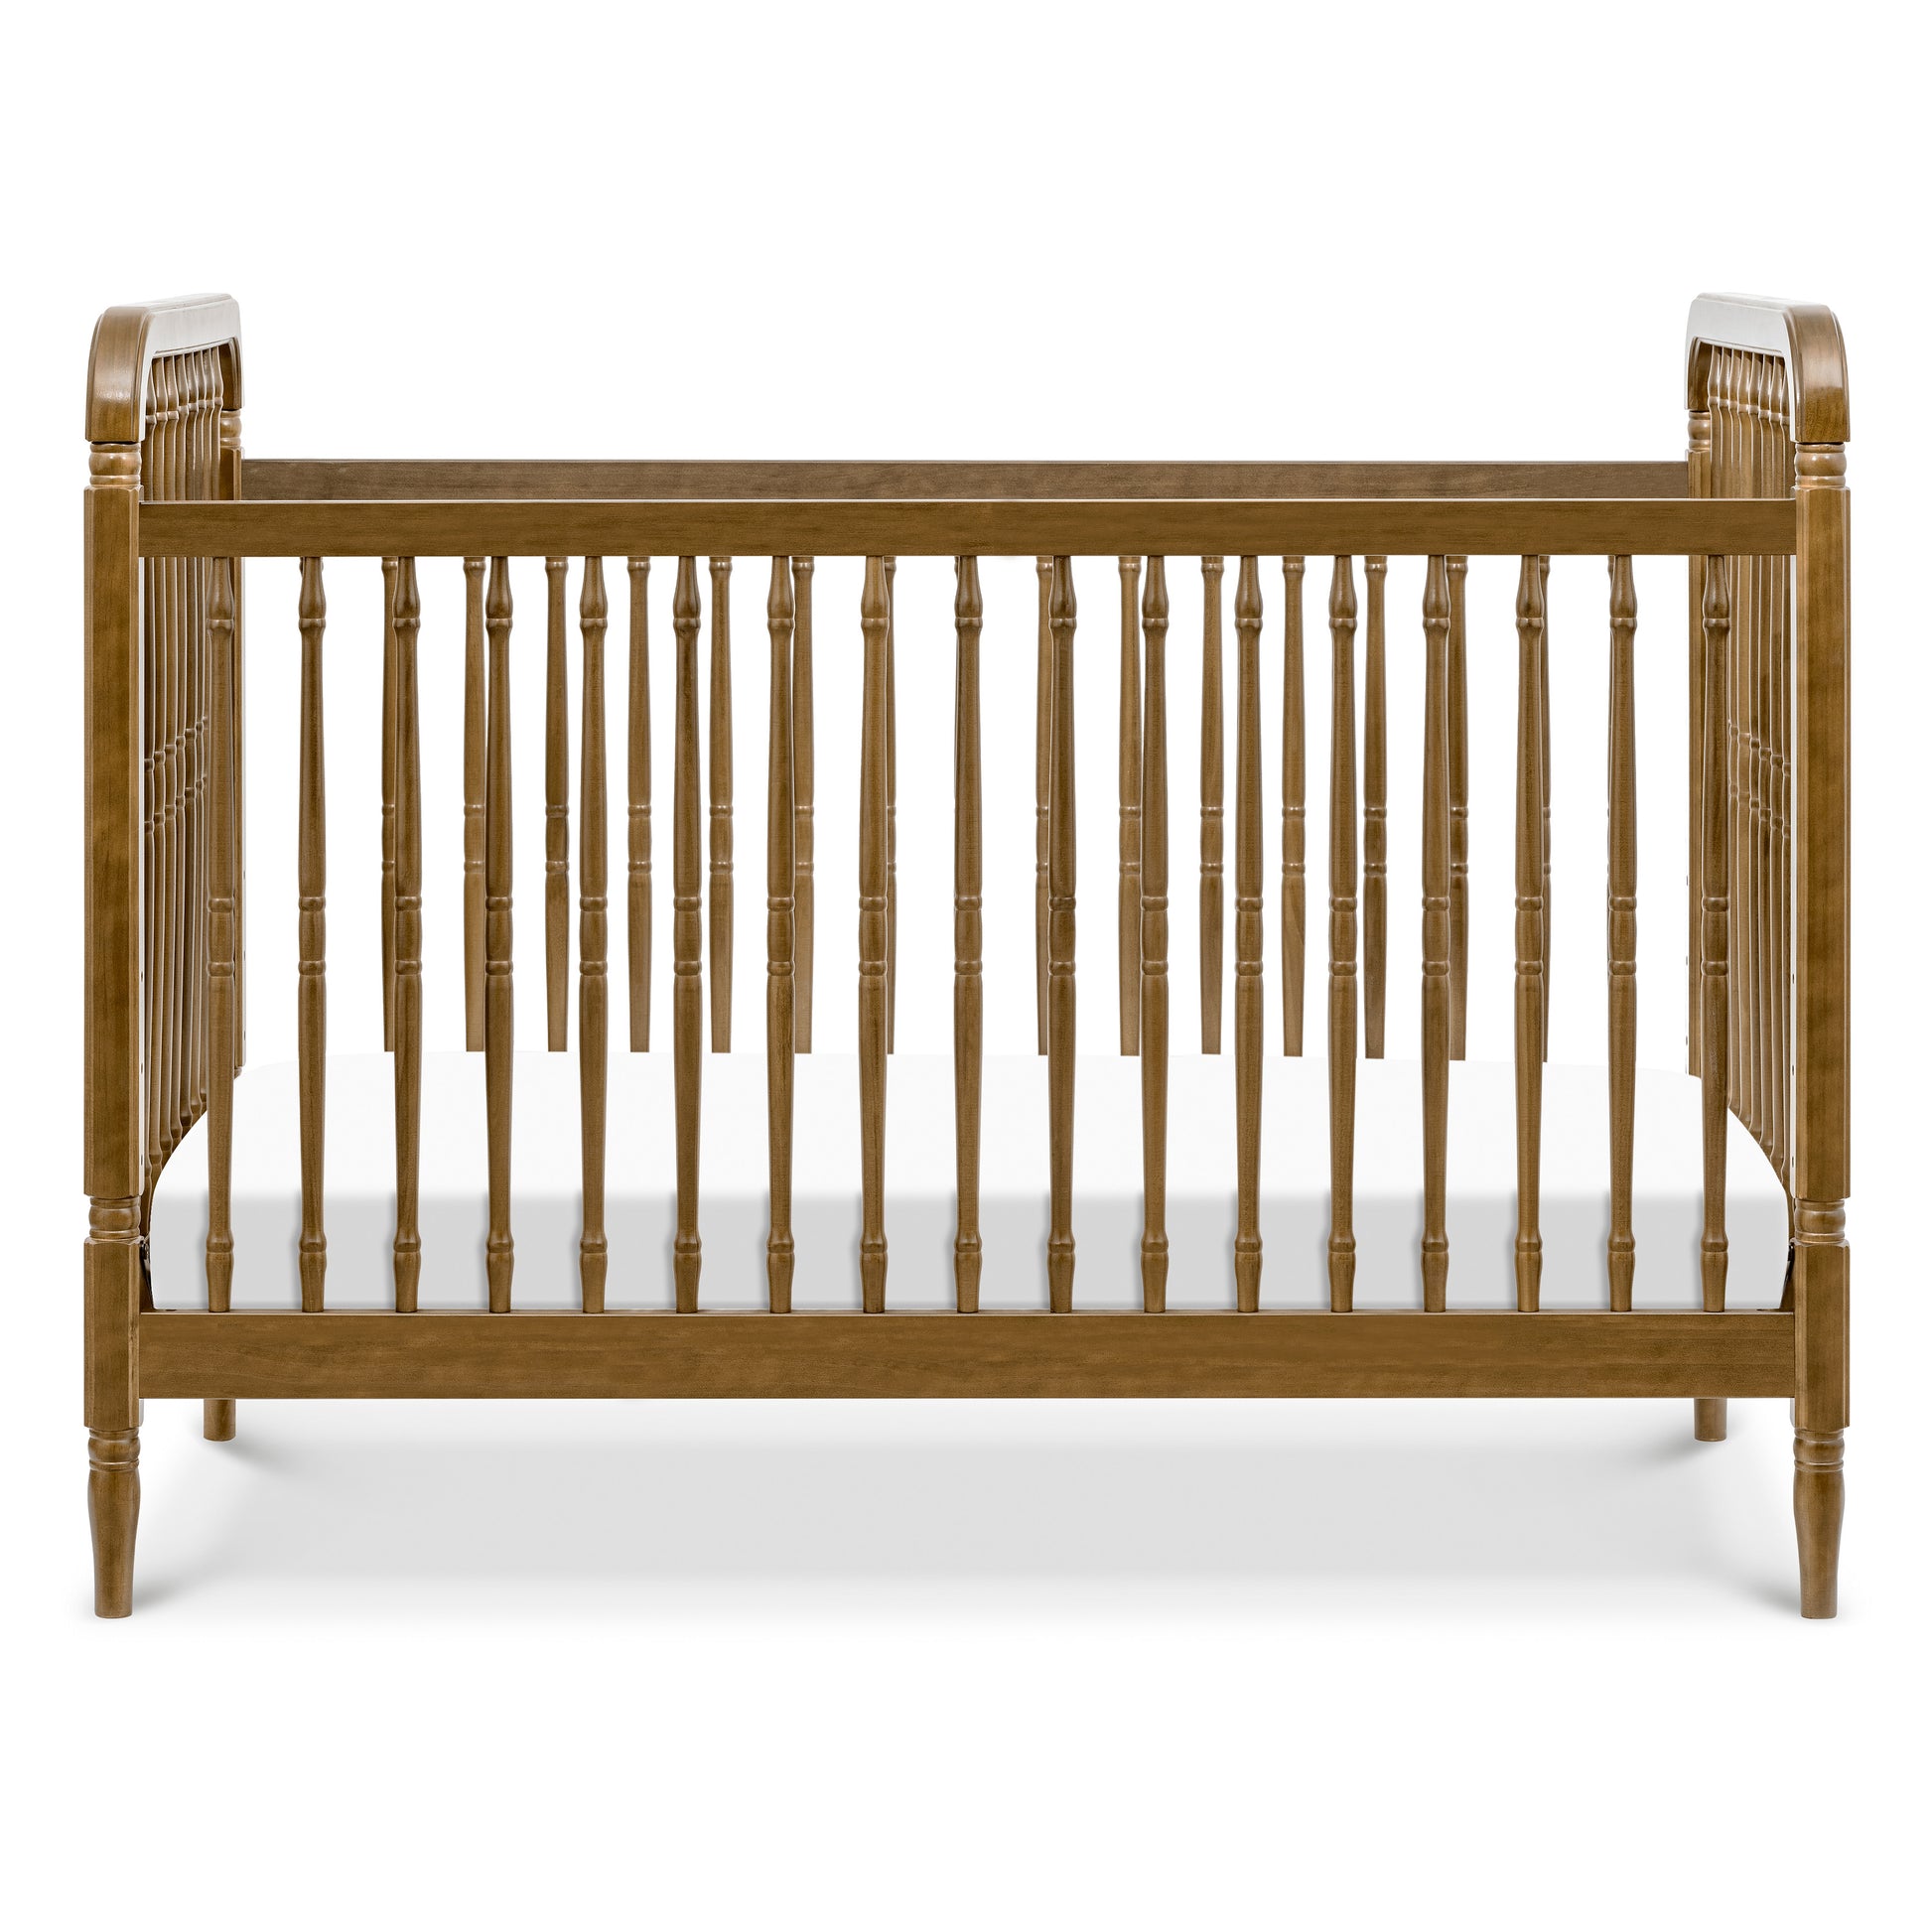 M7101NL,Liberty 3-in-1 Convertible Spindle Crib w/Toddler Bed Conversion Kit in Natural Walnut